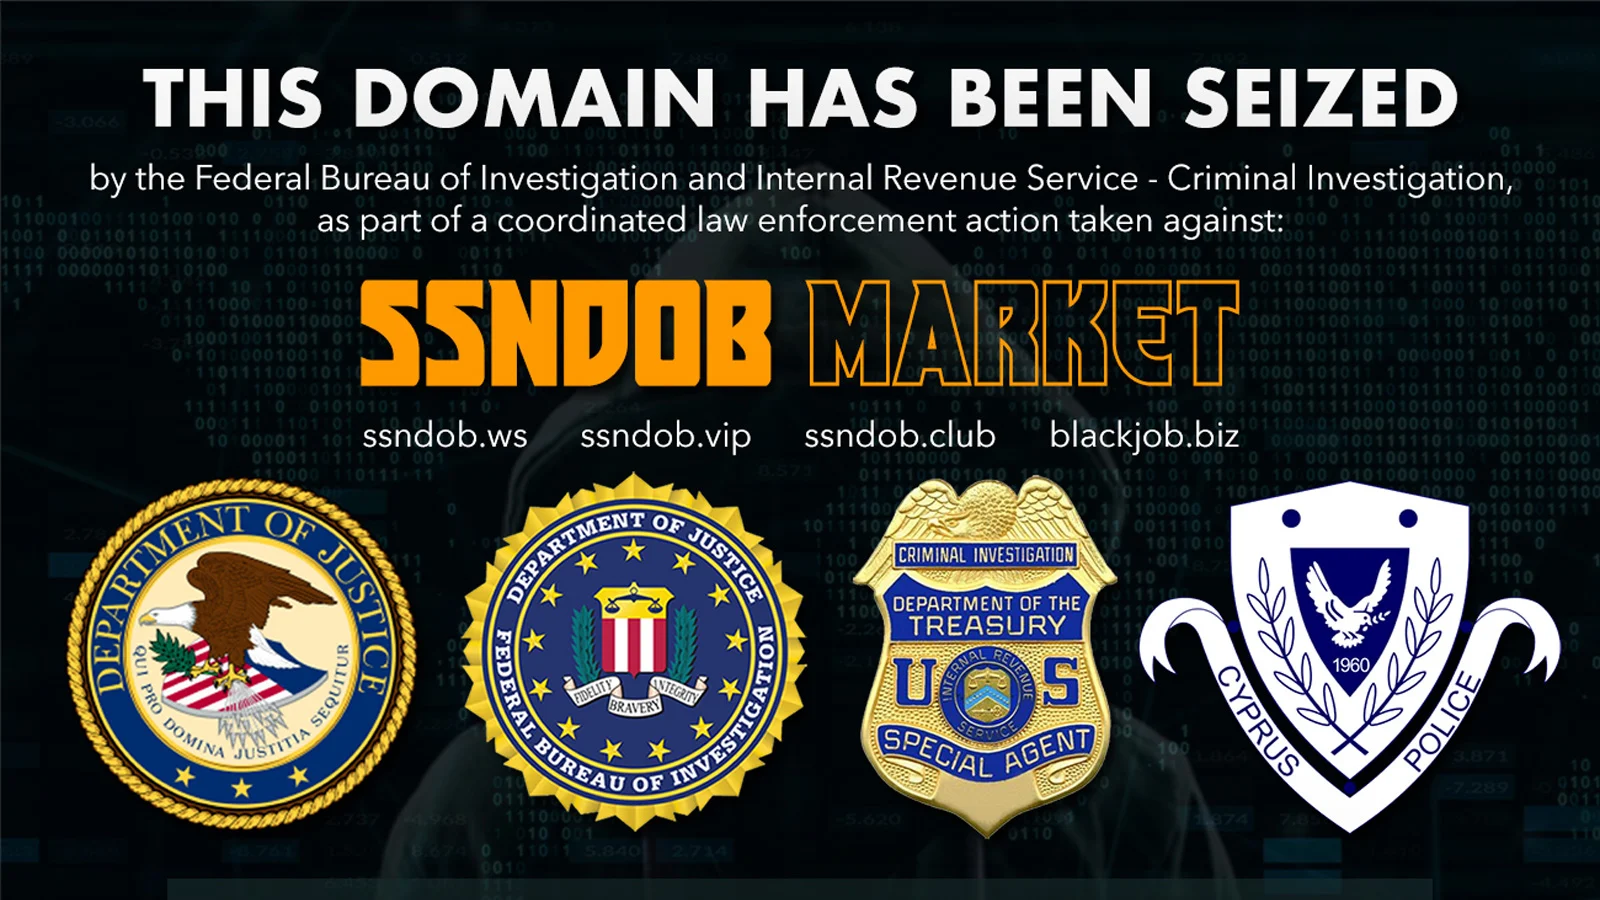 Seizure banner placed on the SSNDOB domains